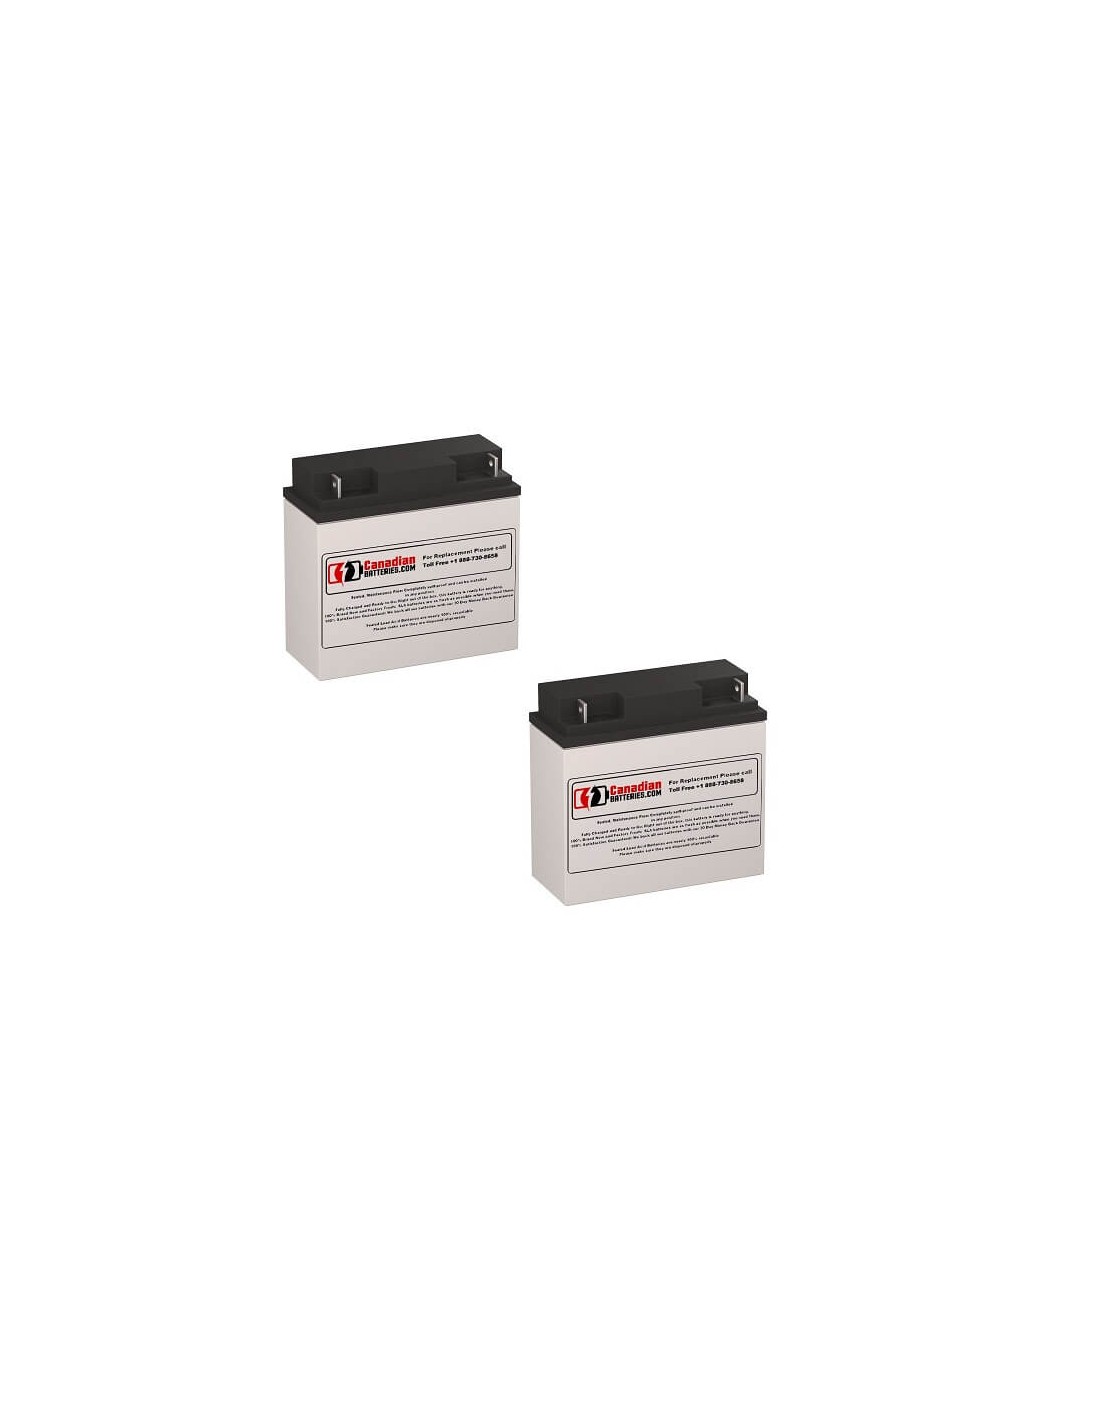 Batteries for Oneac On1300i-sn UPS, 2 x 12V, 18Ah - 216Wh